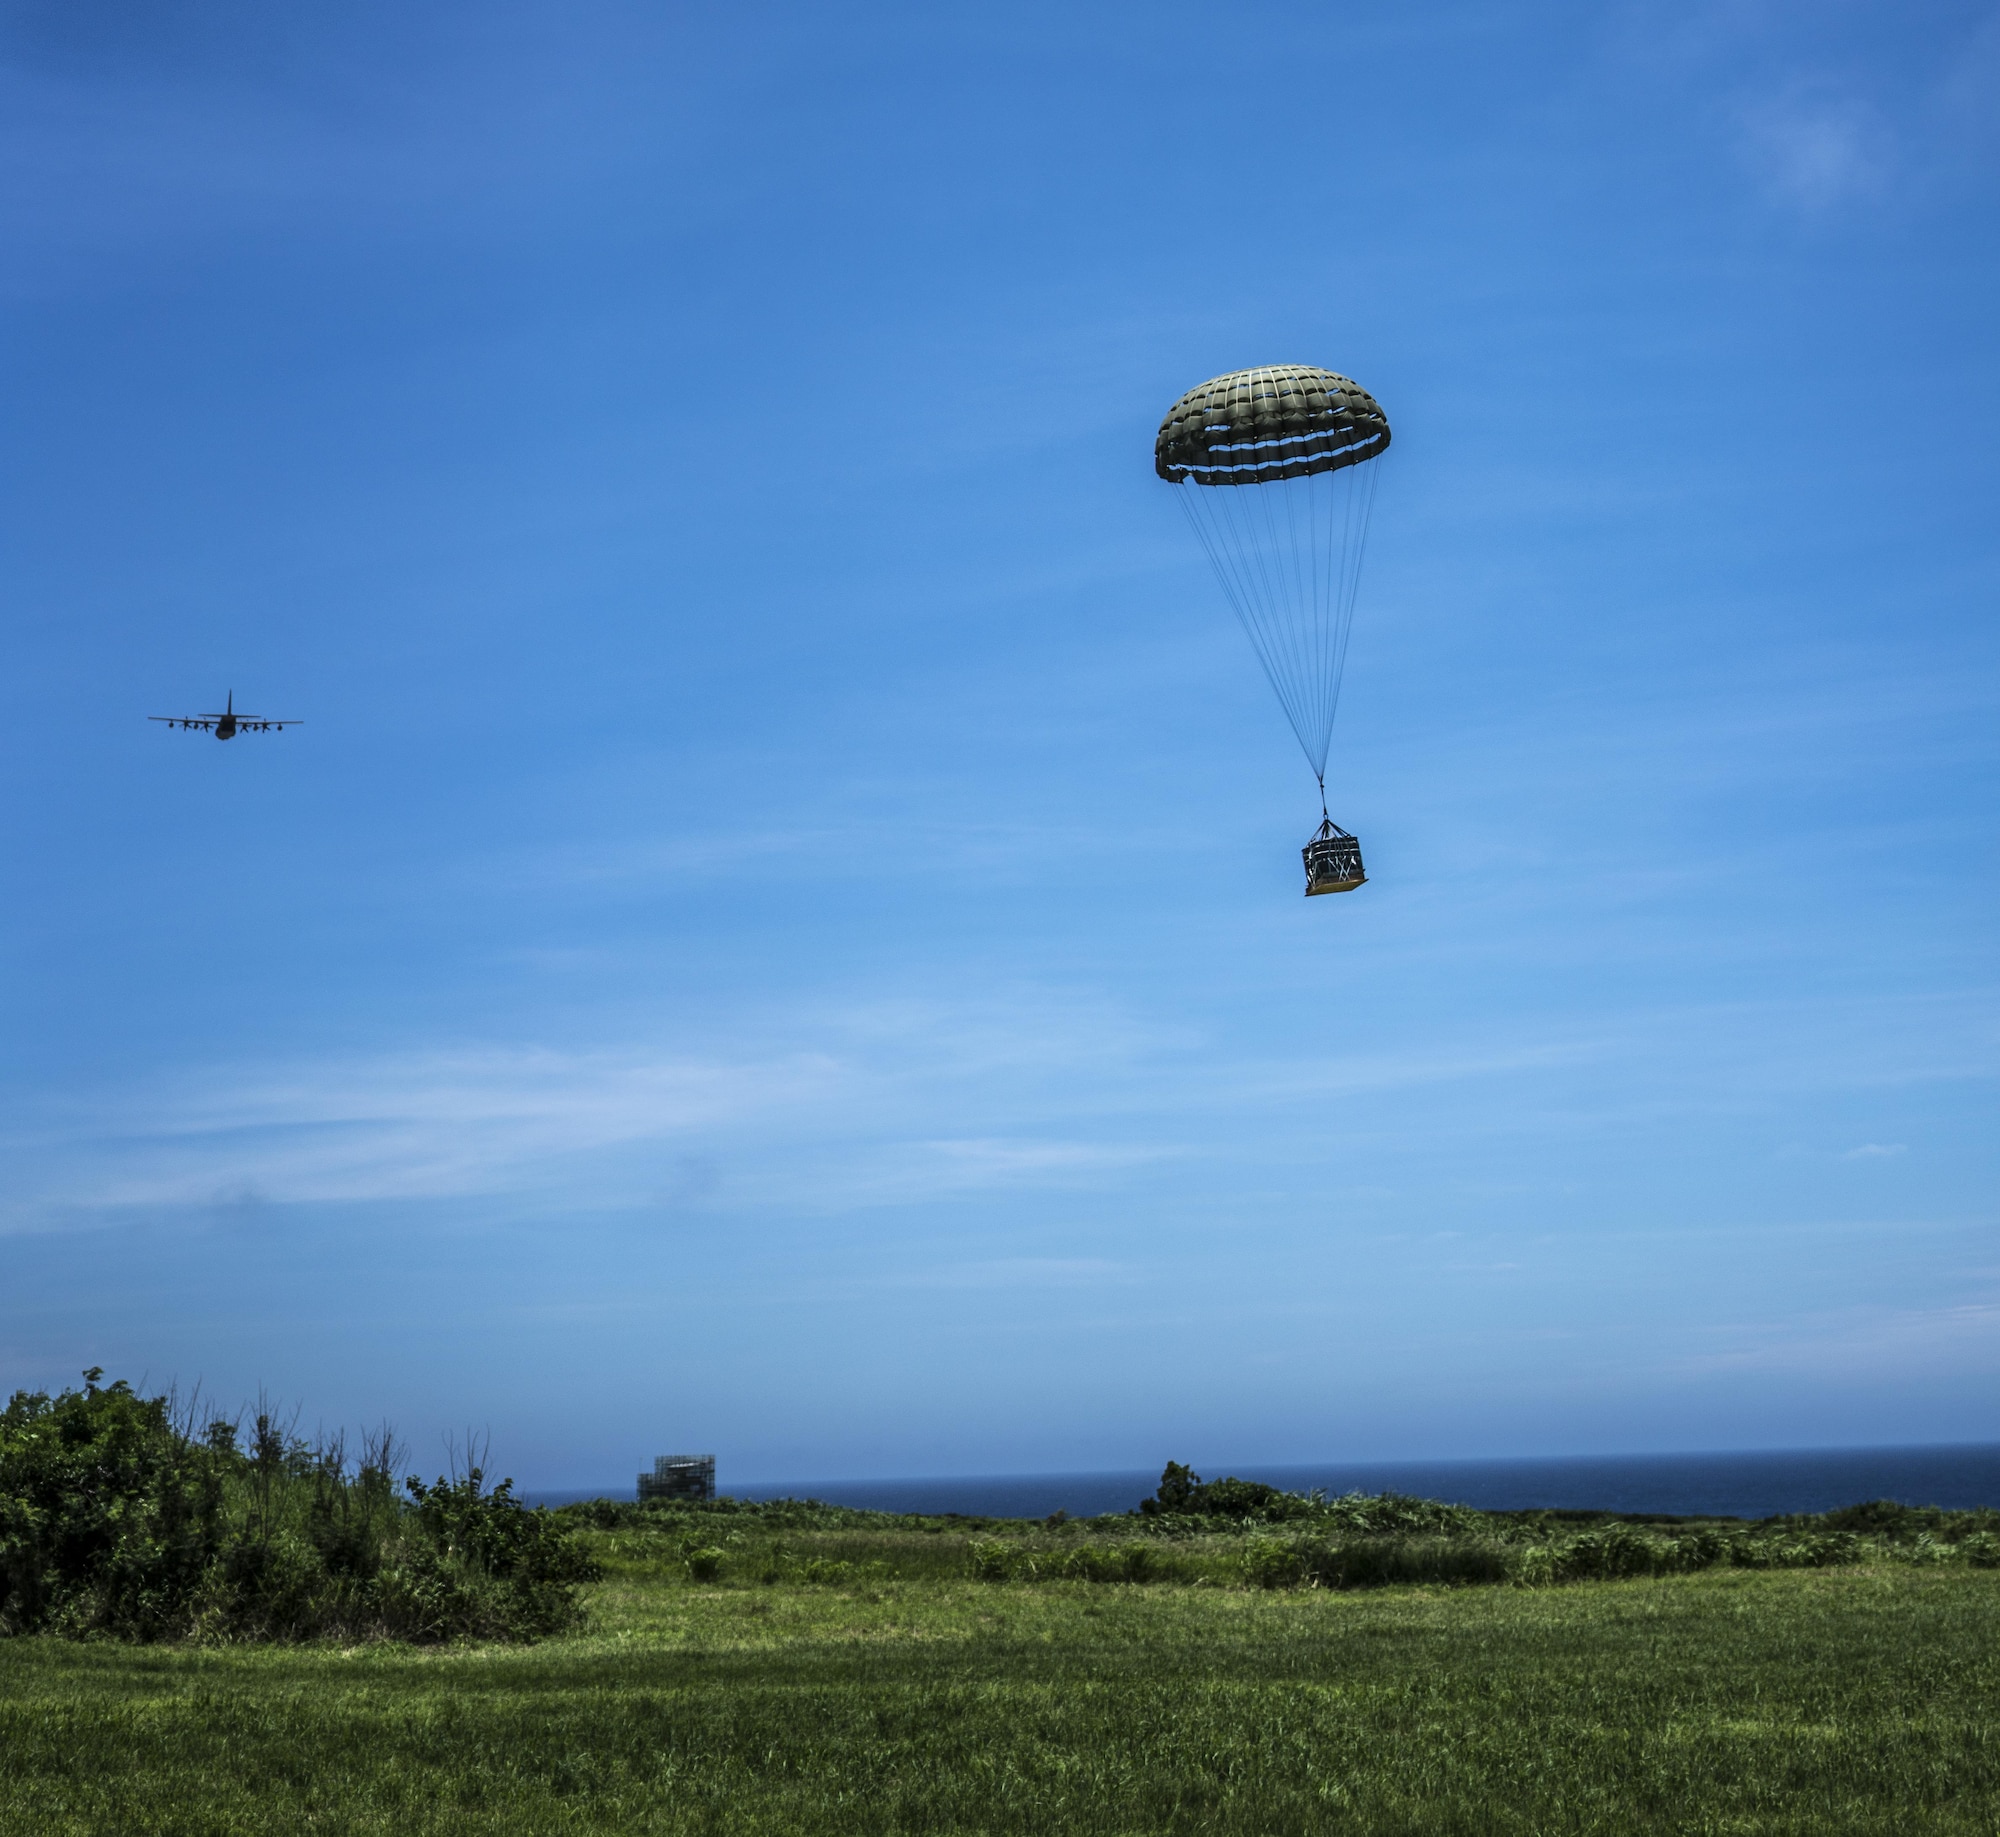 A U.S. Air Force MC-130J Commando II drops a resupply bundle during the airdrop portion of the mass launch training mission June 22, 2017, at Ie Shima Range, Okinawa, Japan. Aircrews must consider a number of variables in order to execute a precise and effective airdrop, to include wind speed, aircraft velocity, altitude, location and timing. (U.S. Air Force photo by Capt. Jessica Tait)